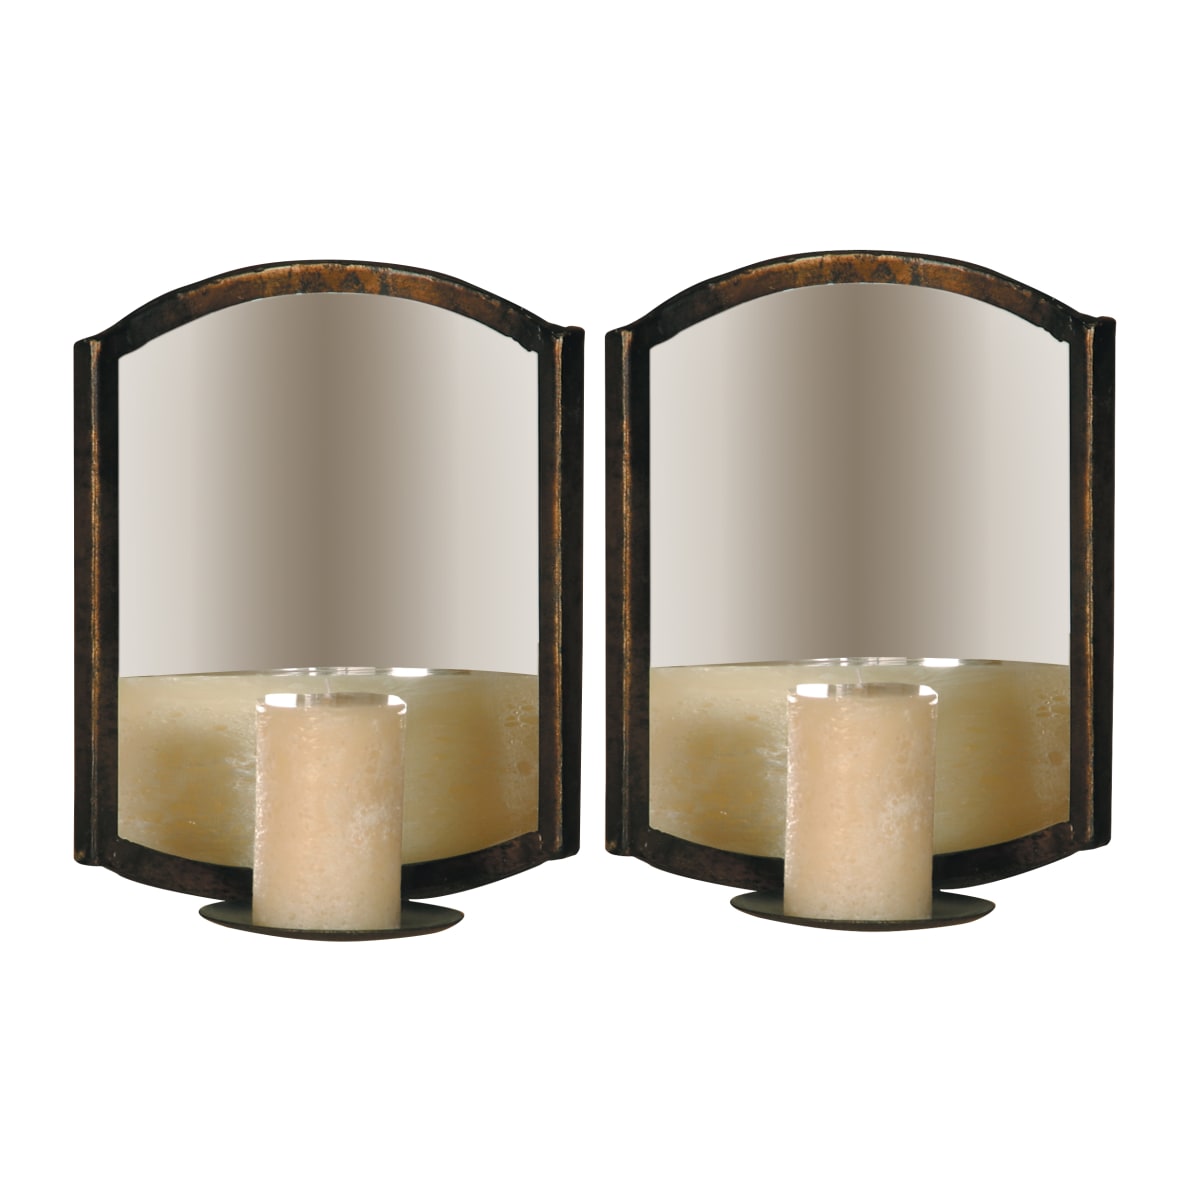 Uttermost 13360 P Caden Set of 2 Mirrored Candle Wall